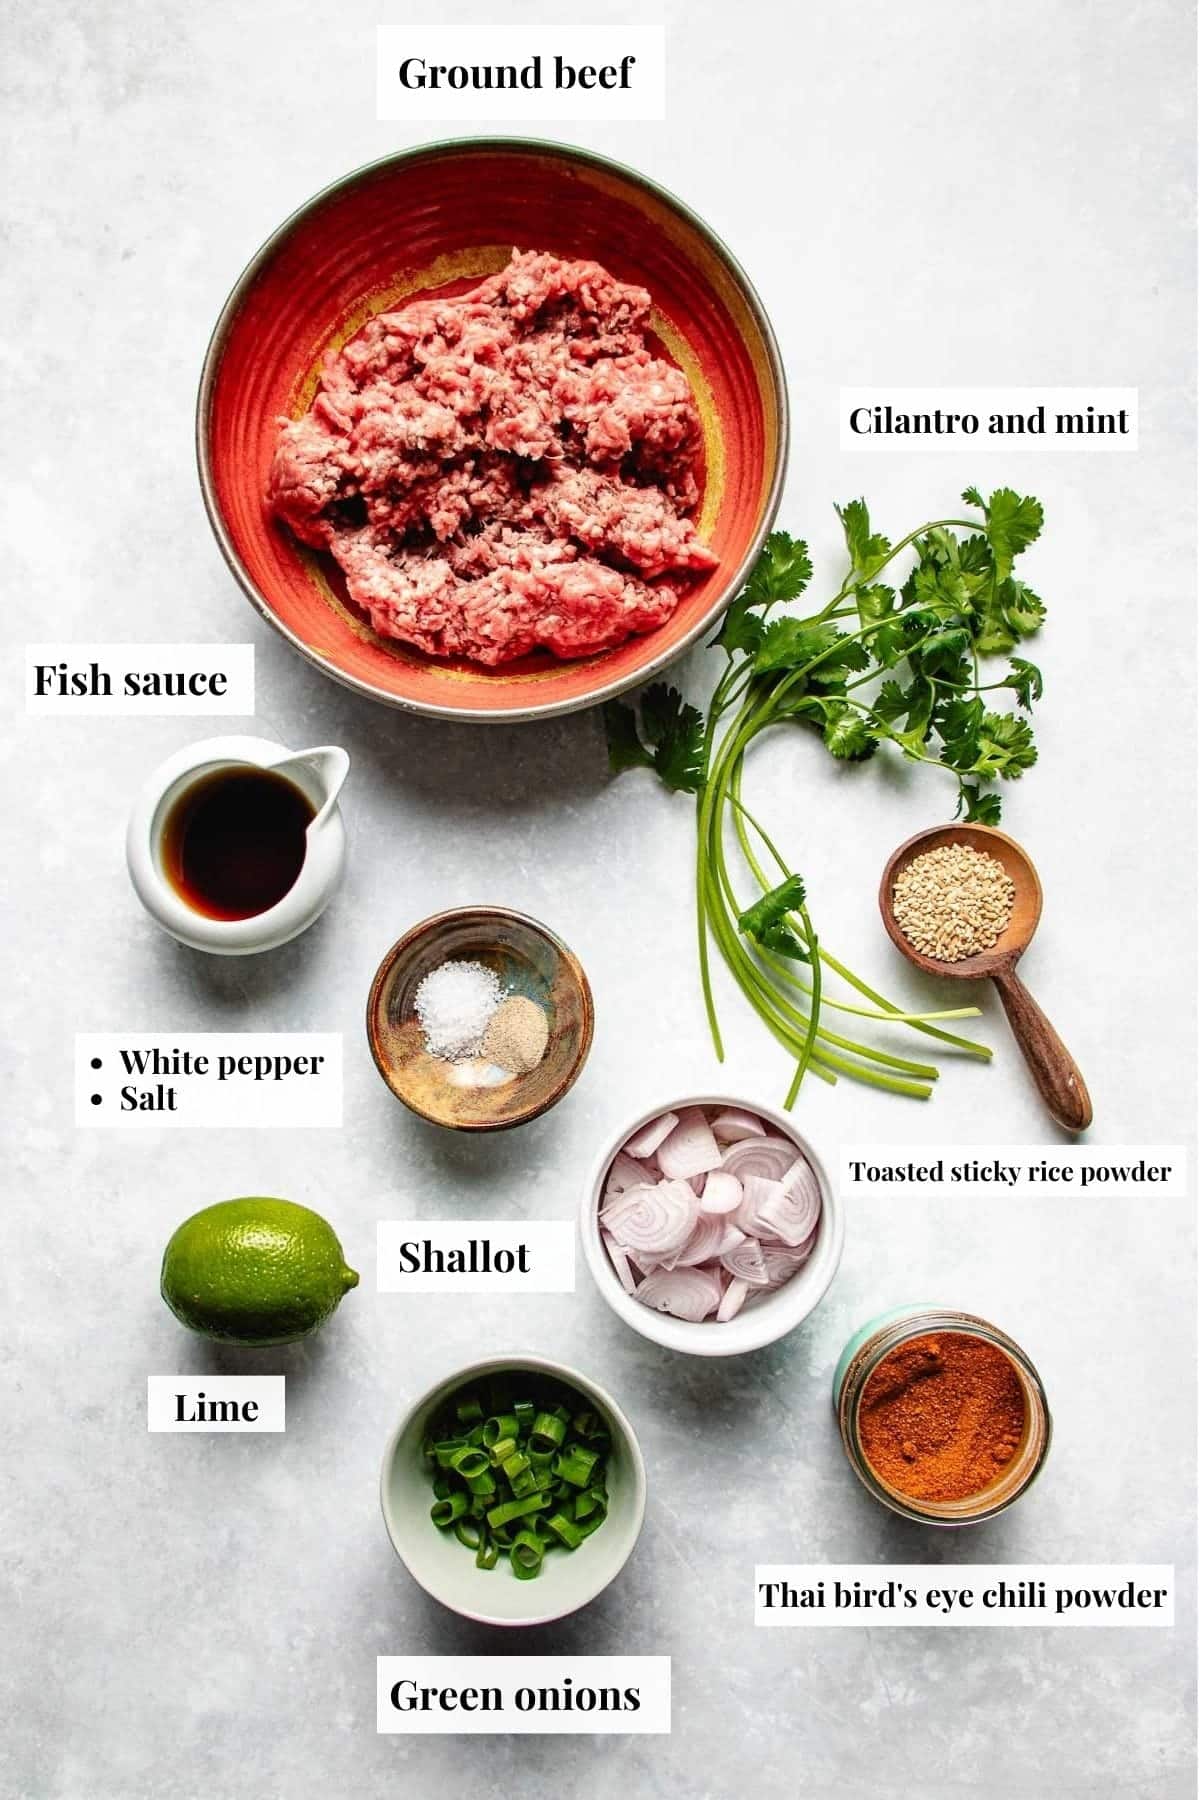 Photo shows ingredients needed to make authentic beef larb.